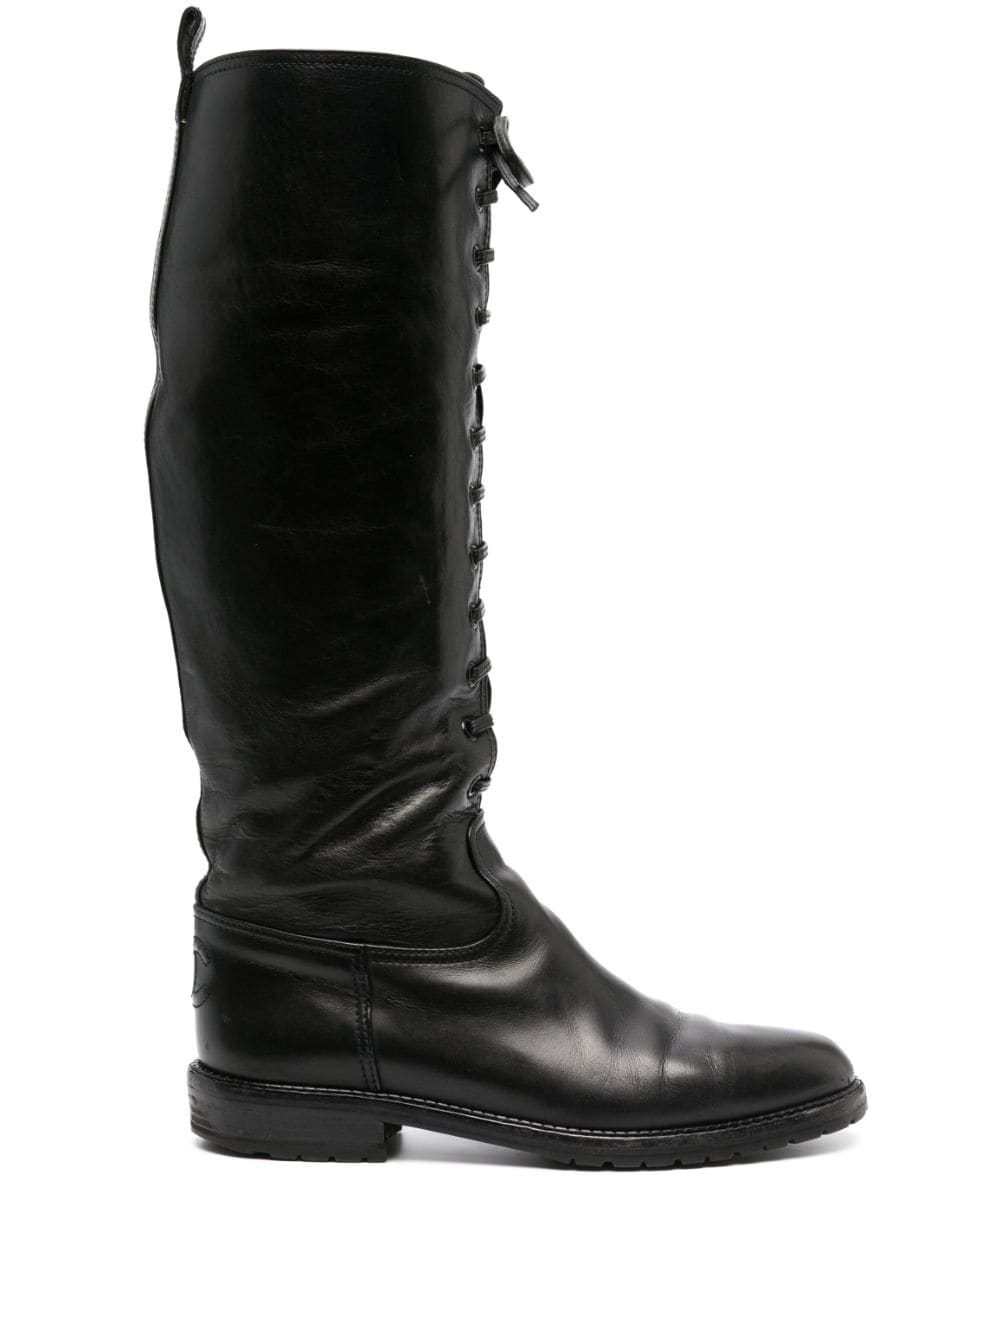 CHANEL Pre-Owned 2000s lace-up knee-high boots